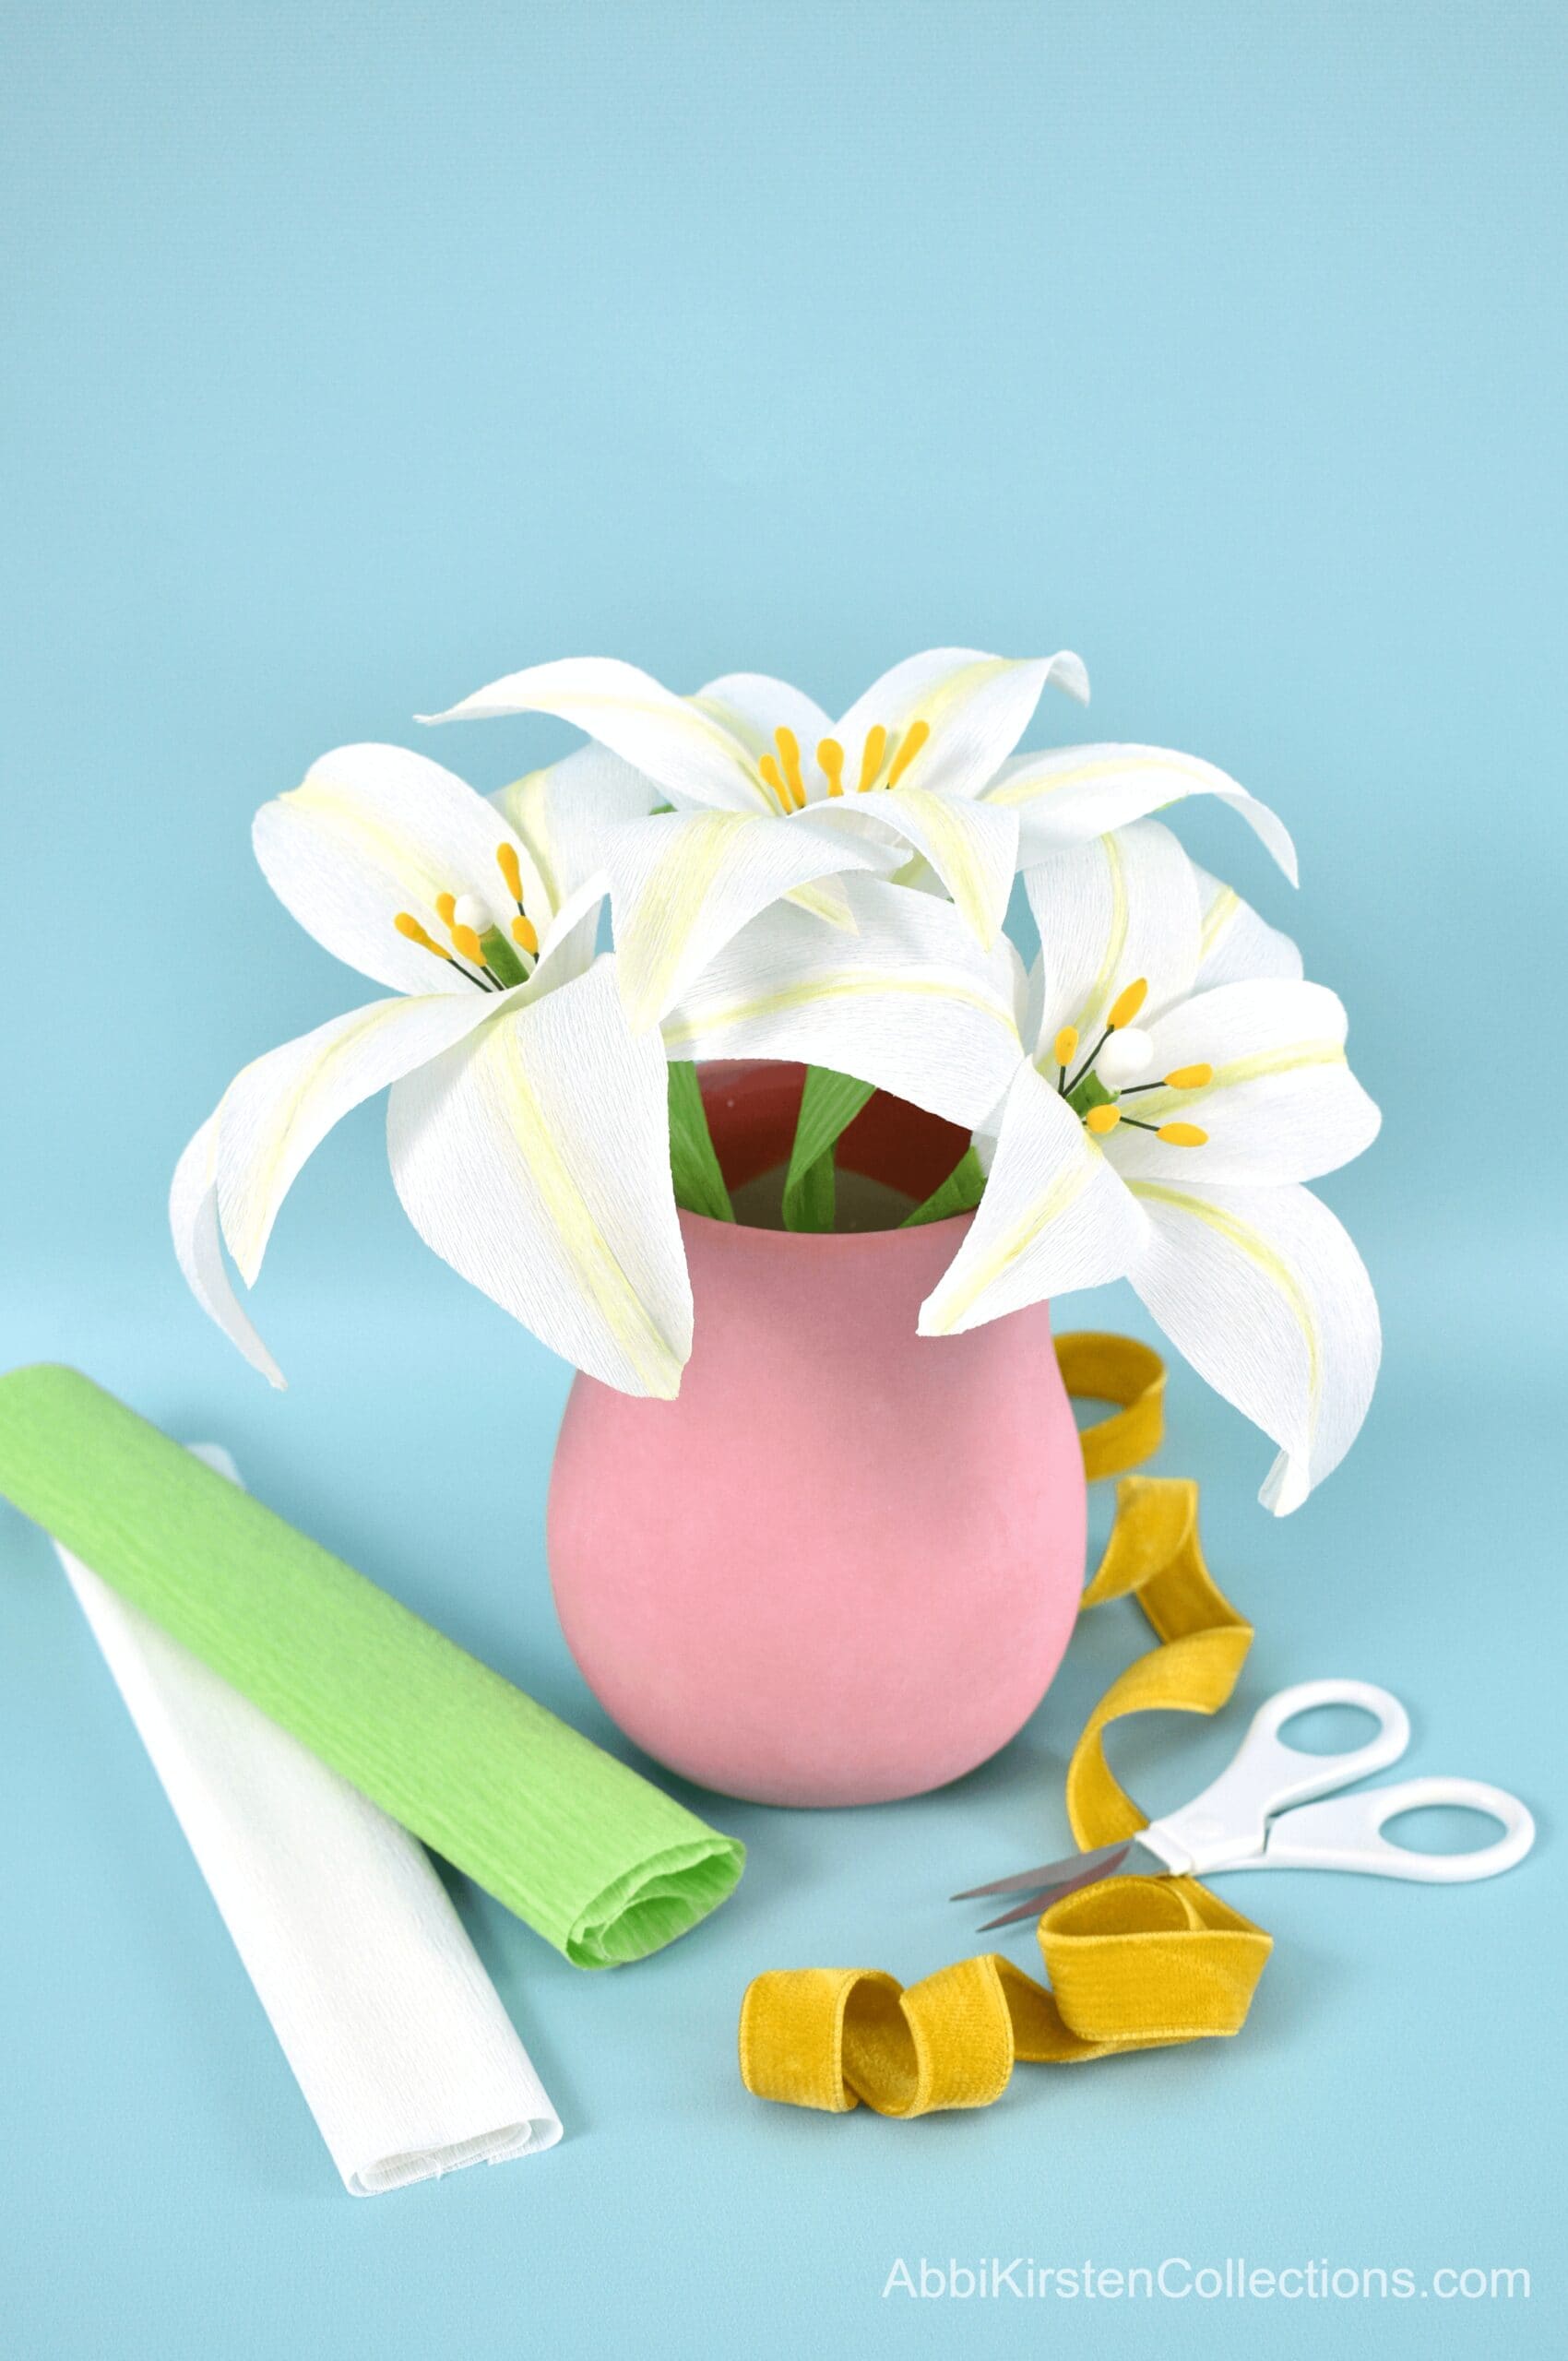 A finished bouquet of three white crepe paper lilies with green leaves in a pink vase. Rolls of white and green crepe paper, detail scissors and yellow ribbon lay in front of the vase on a light blus paper backdrop. 